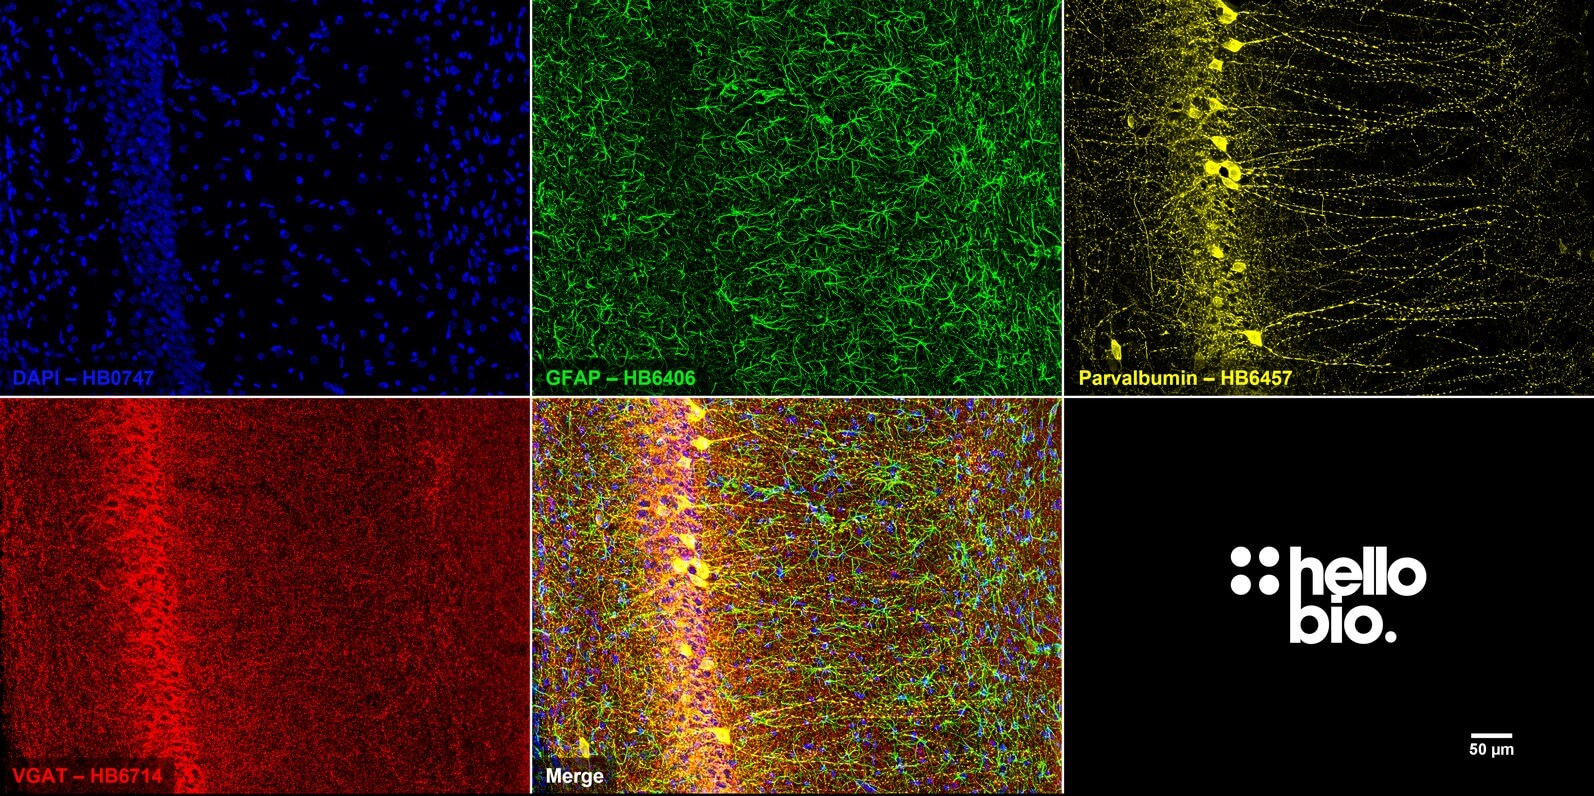 Figure 3. VGAT, Parvalbumin and GFAP expression in rat hippocampal CA1.